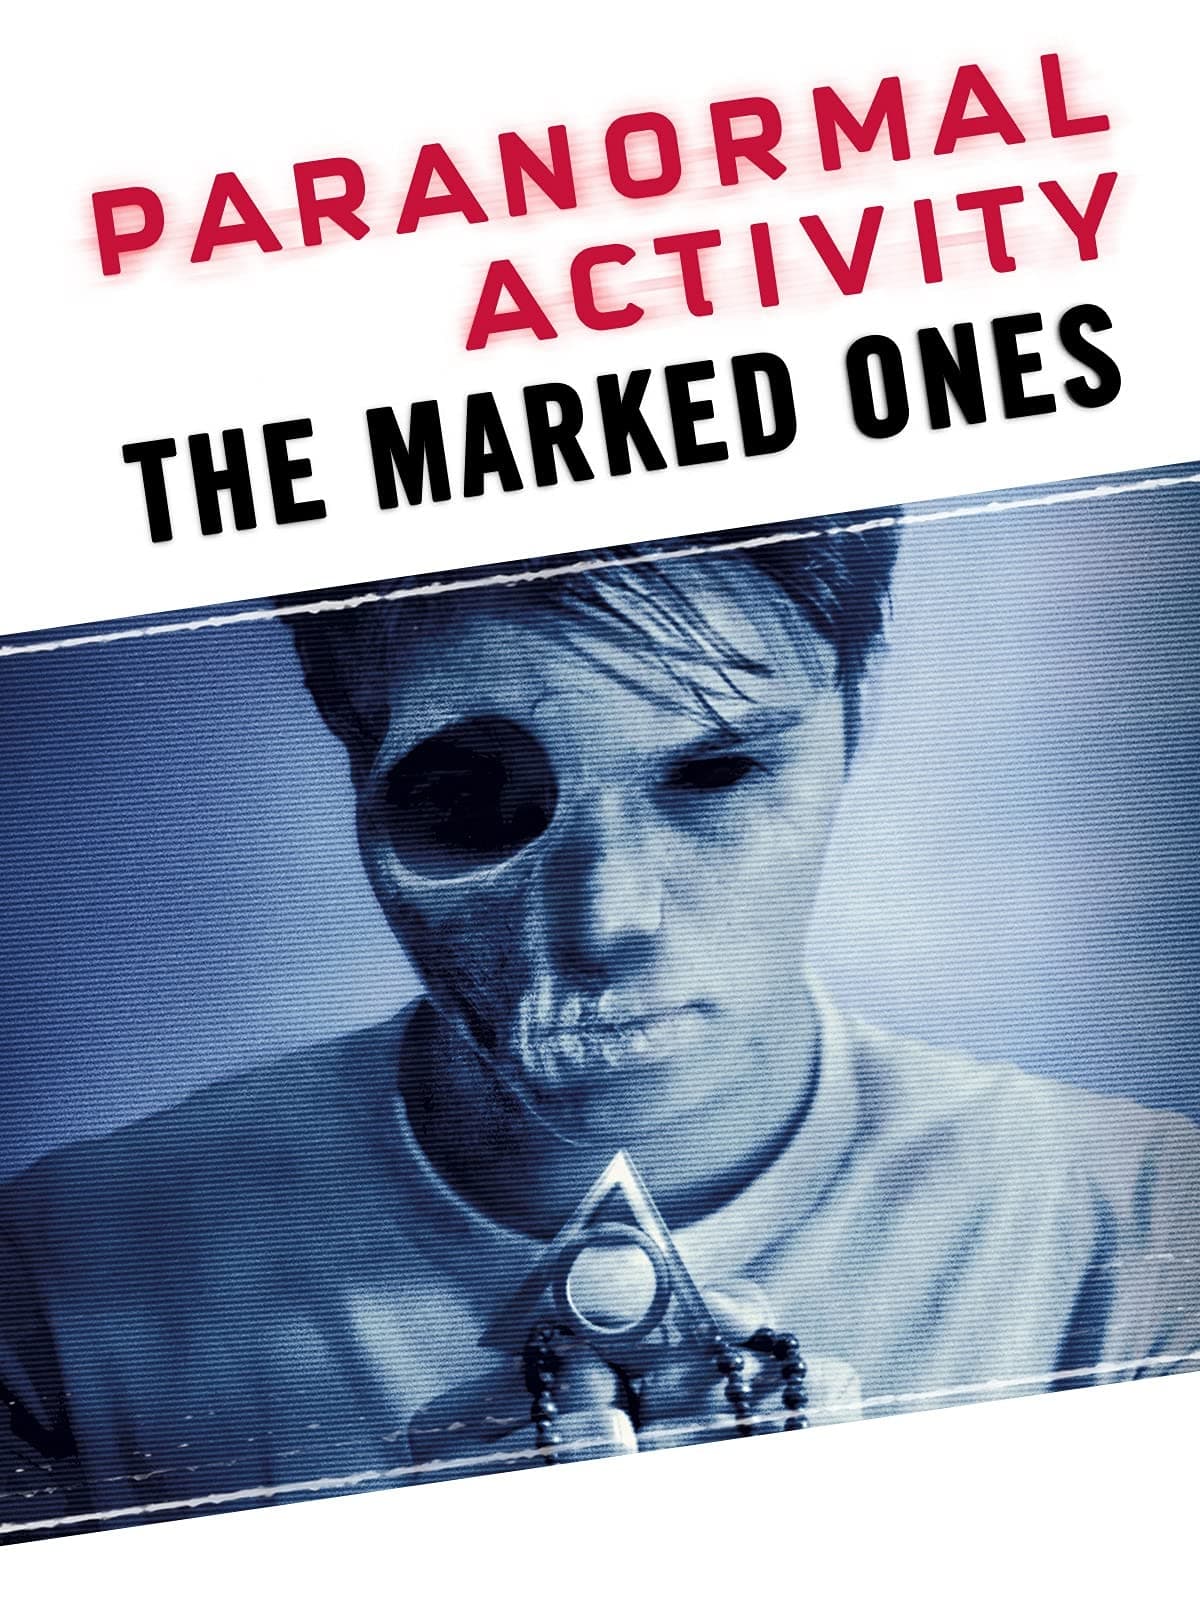 Affiche du film Paranormal Activity: The Marked Ones poster